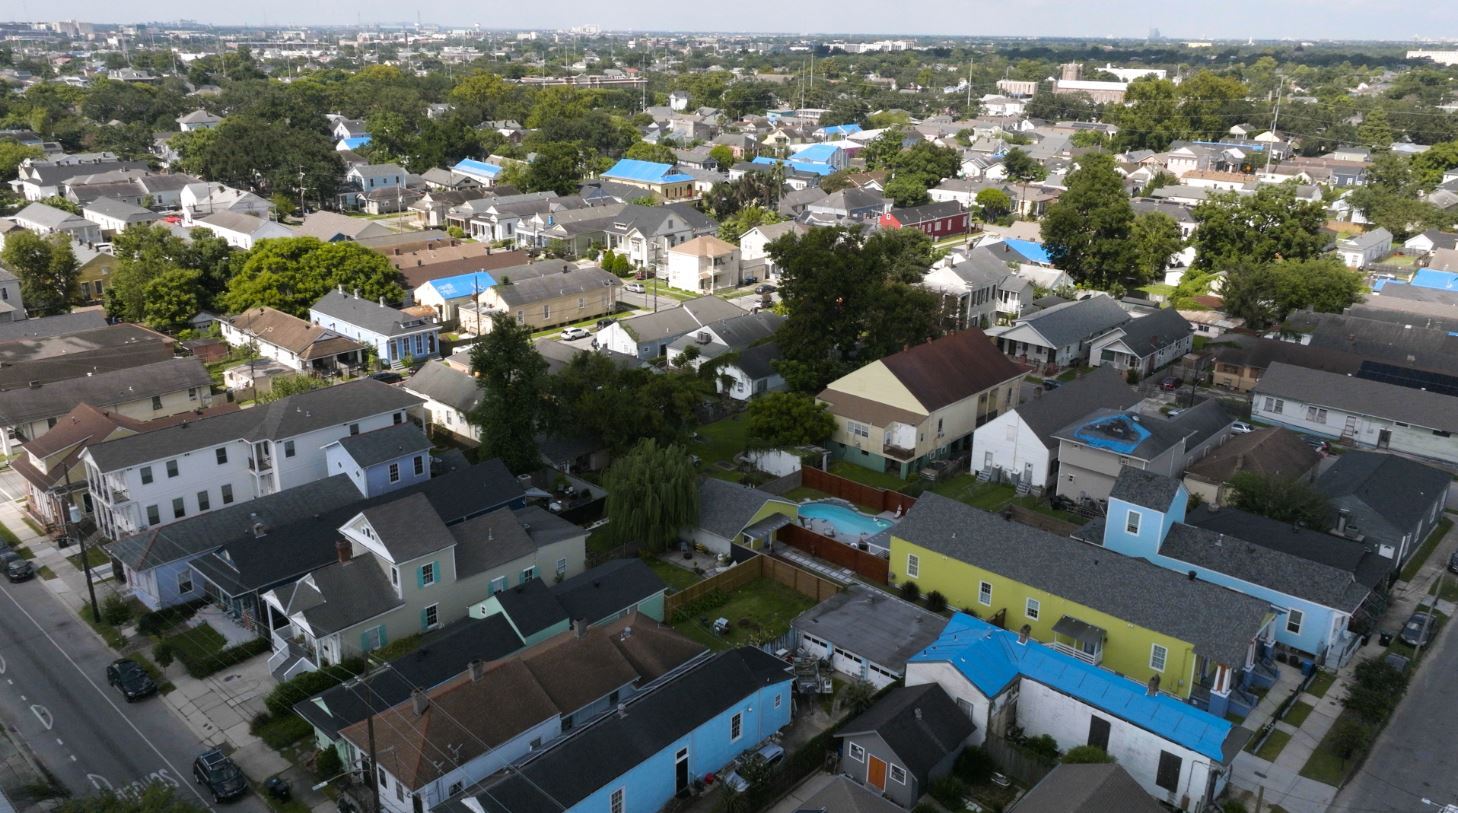 Blue tarps on roofs over new orleans